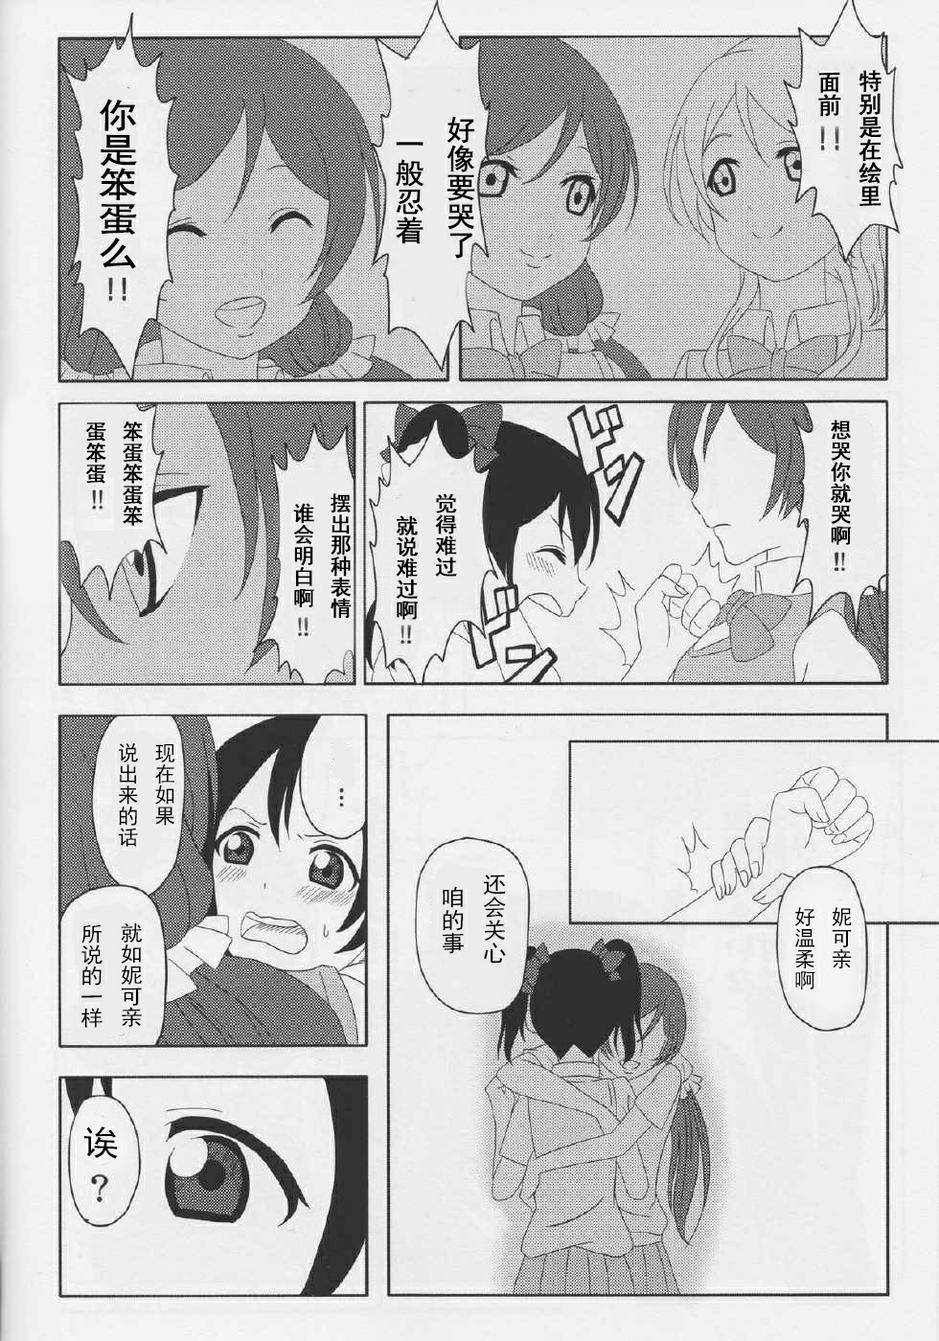 《LoveLive》漫画 笑颜的假面